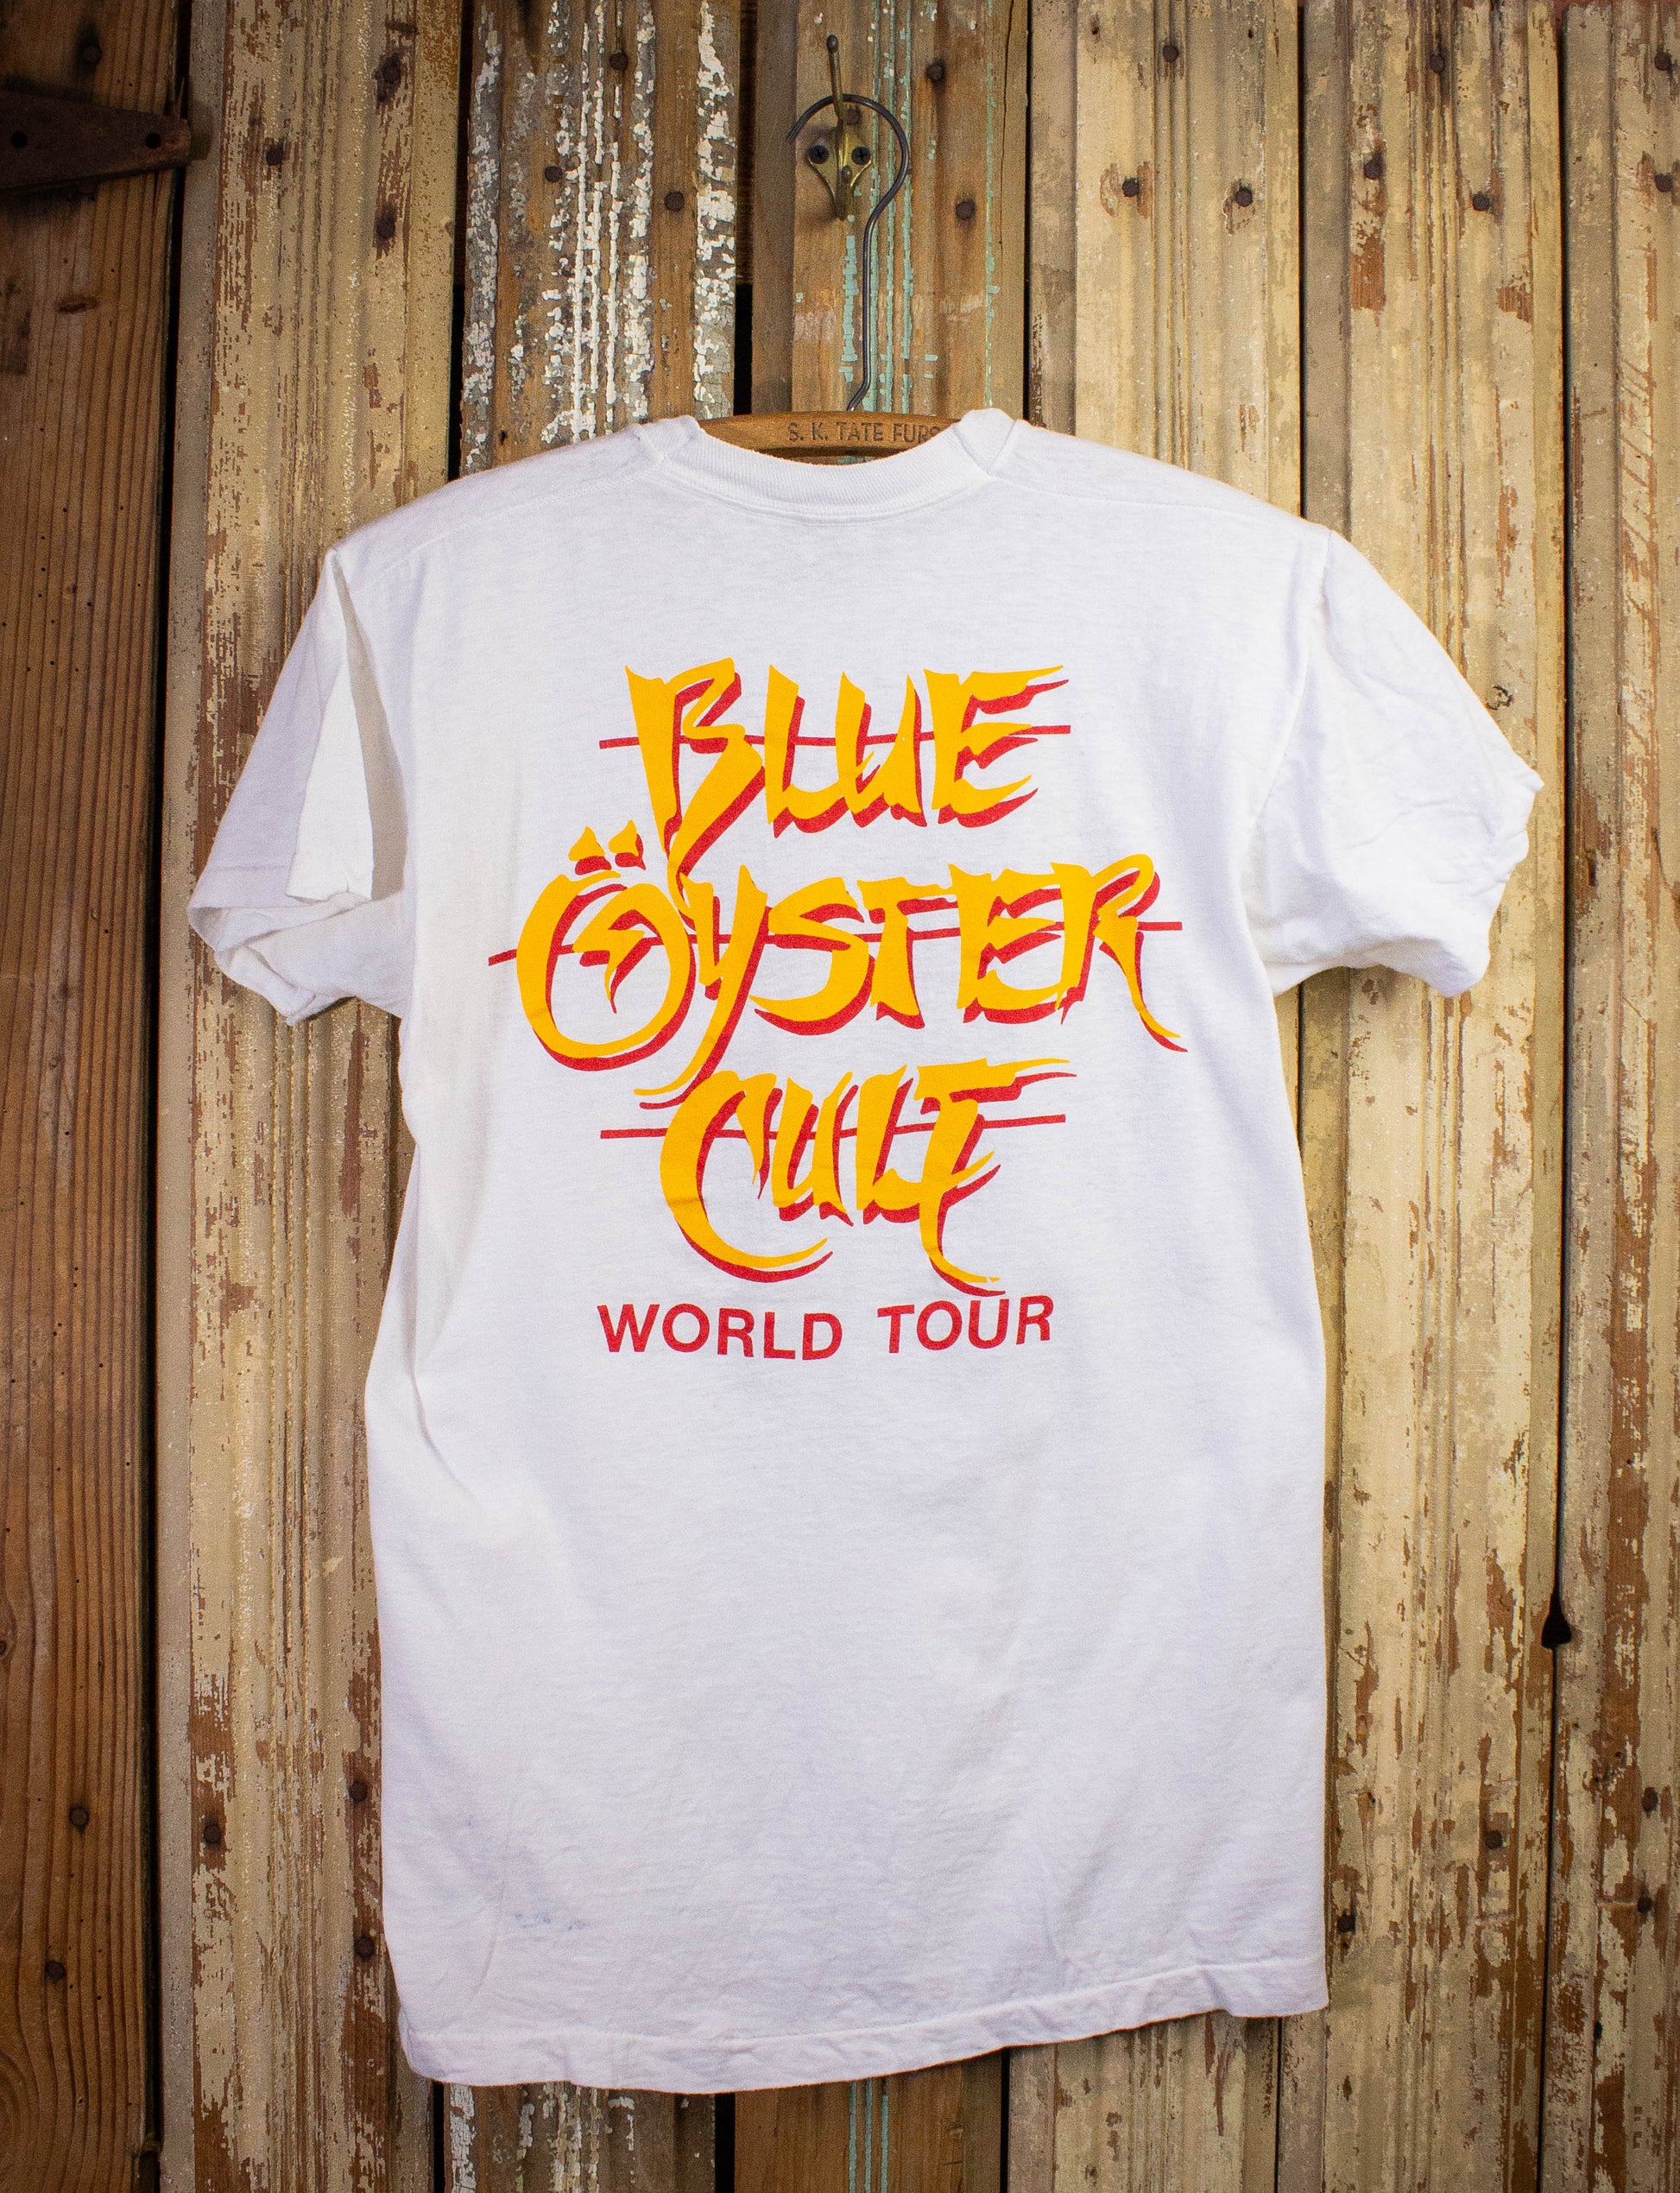 Vintage Blue Oyster Cult Club Ninja World Tour Concert T Shirt 1986 White Small